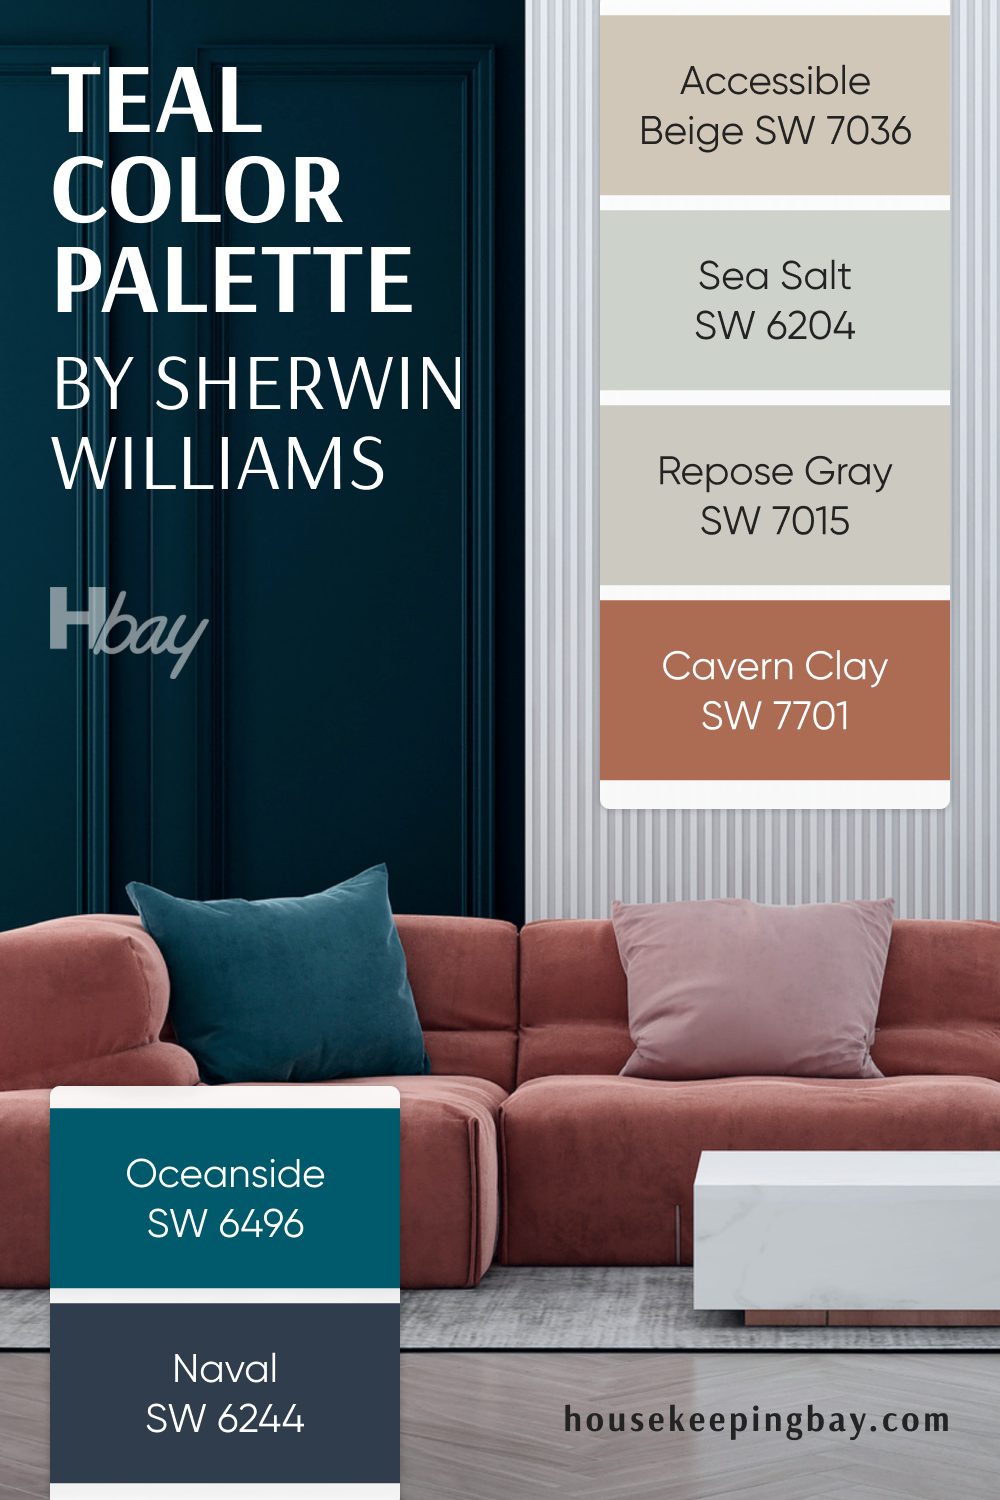 teal color palette sherwin williams